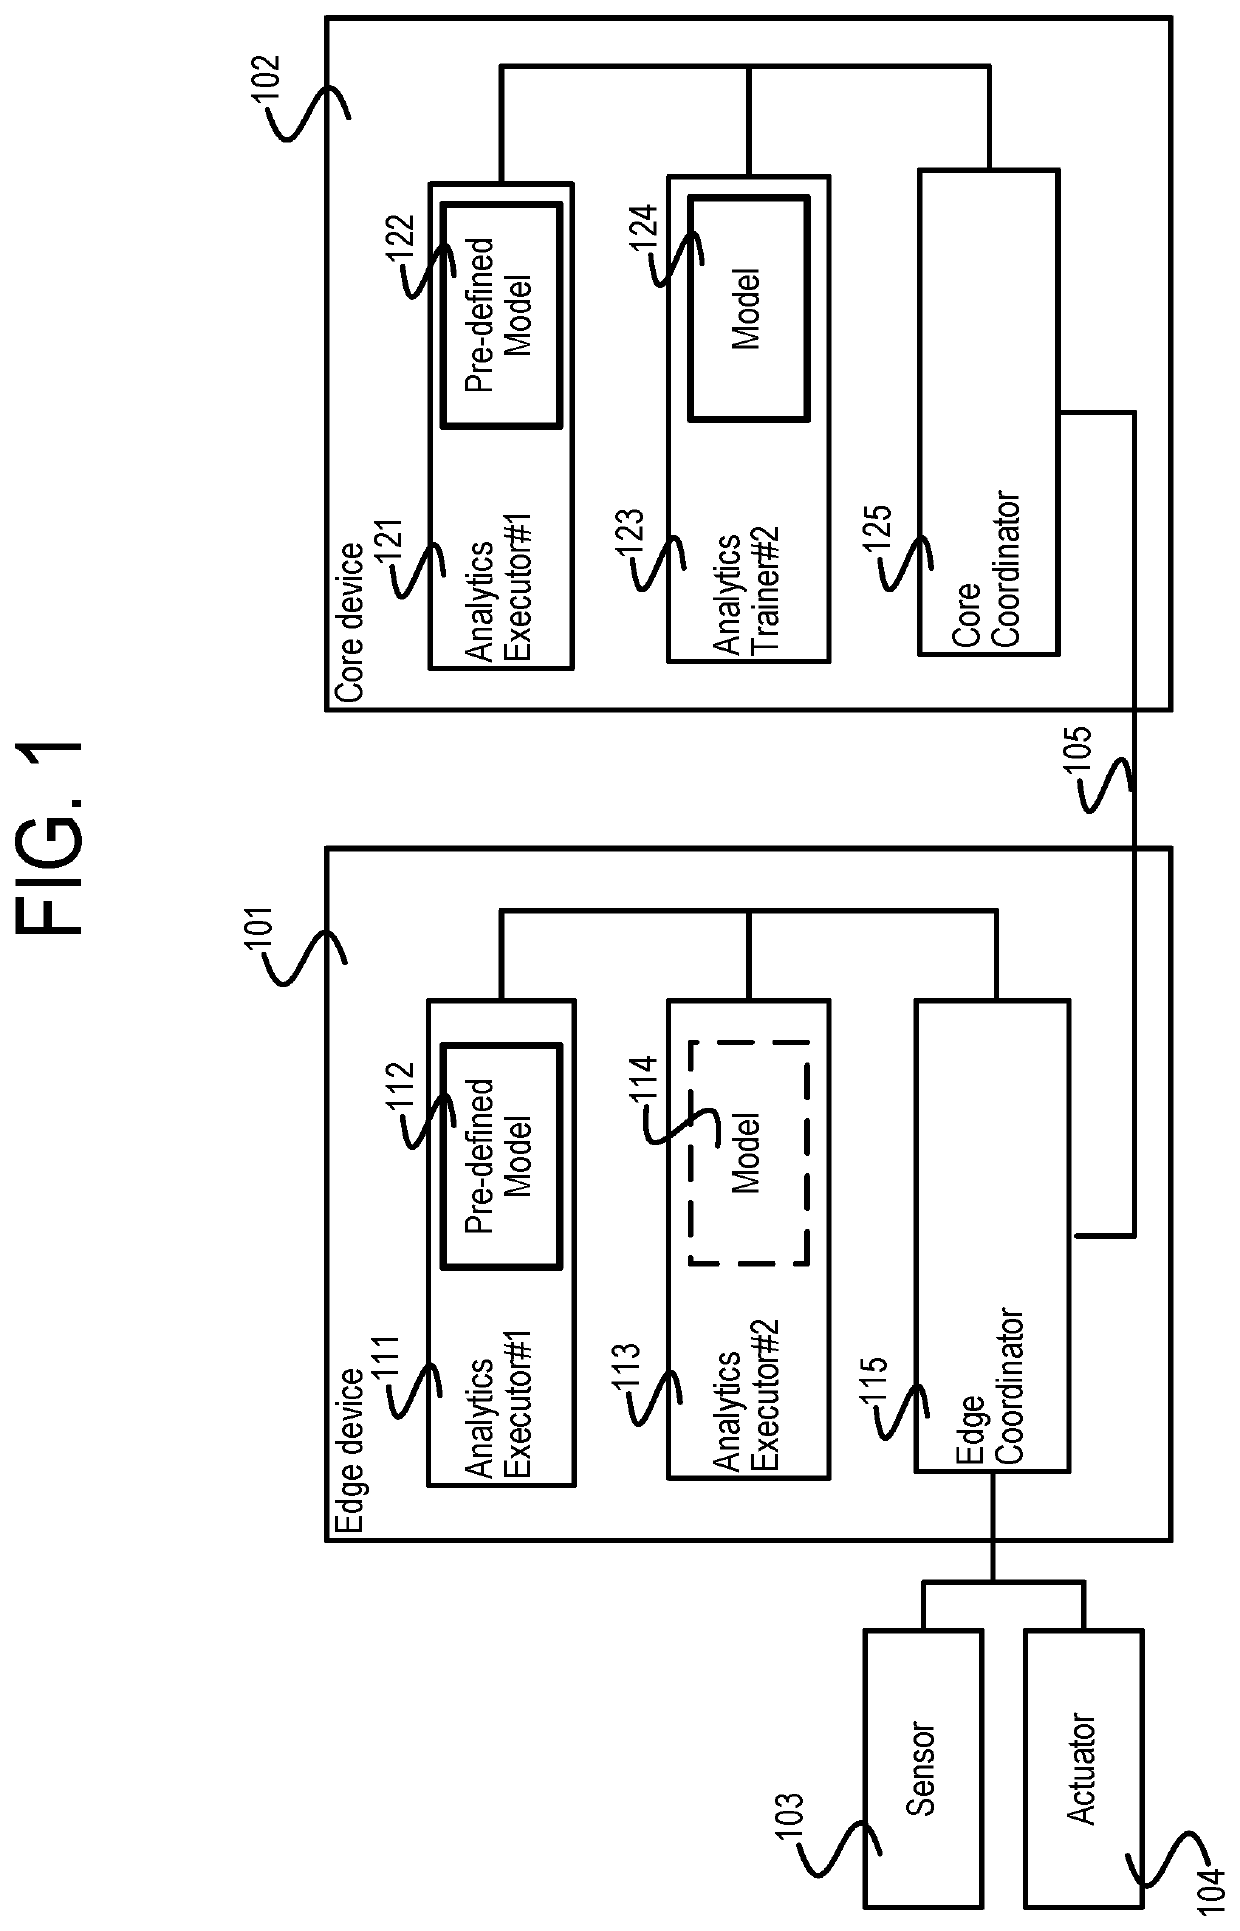 Method and system of analytics system balancing lead time and accuracy of edge analytics modules